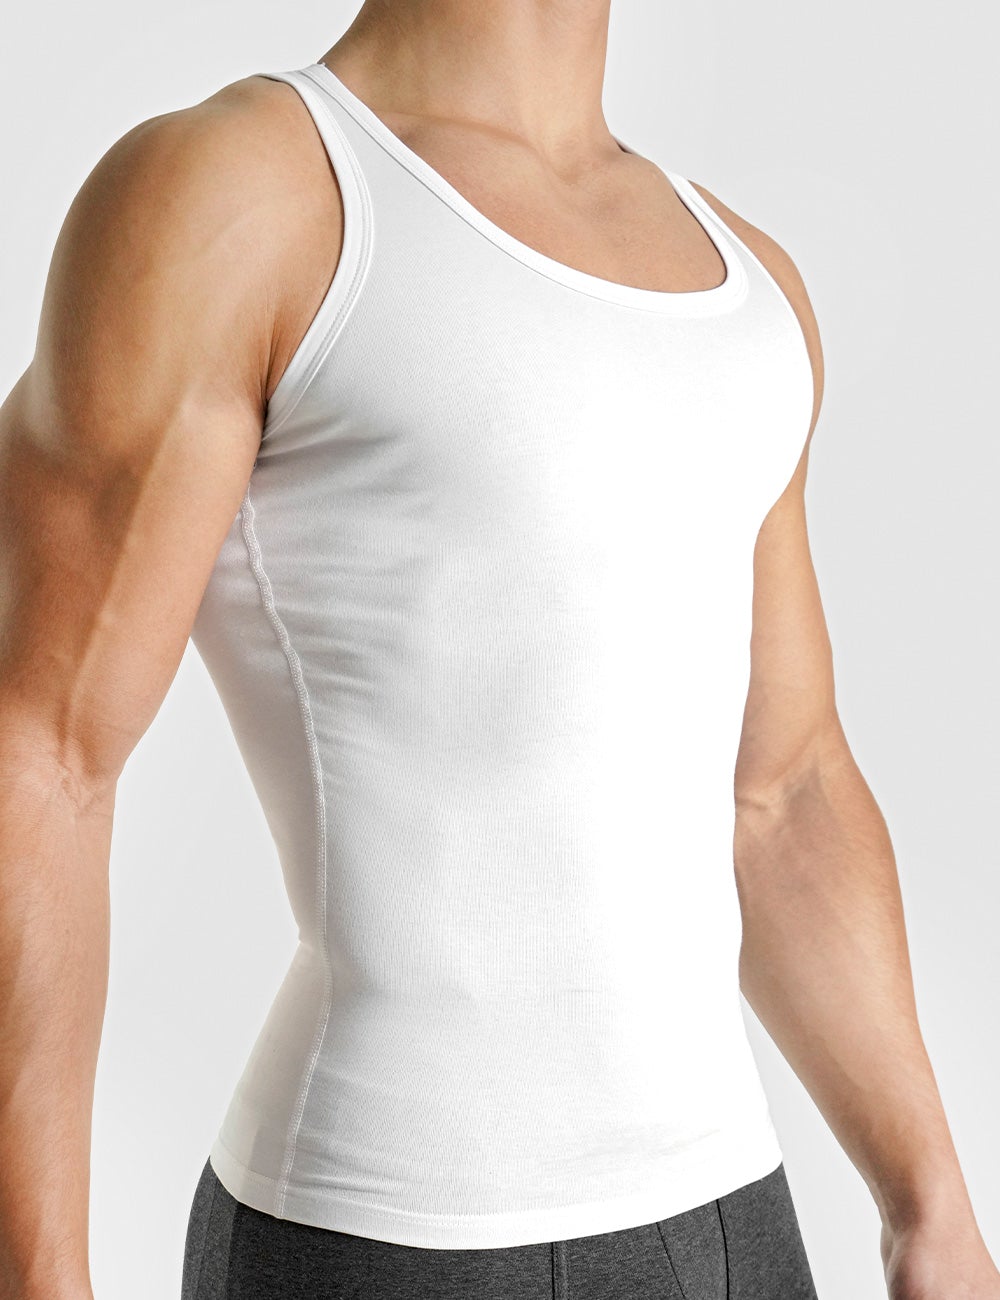  Comfneat Mens 6-Pack A-Shirts Tight Fit Tank Tops Cotton  Spandex Undershirts